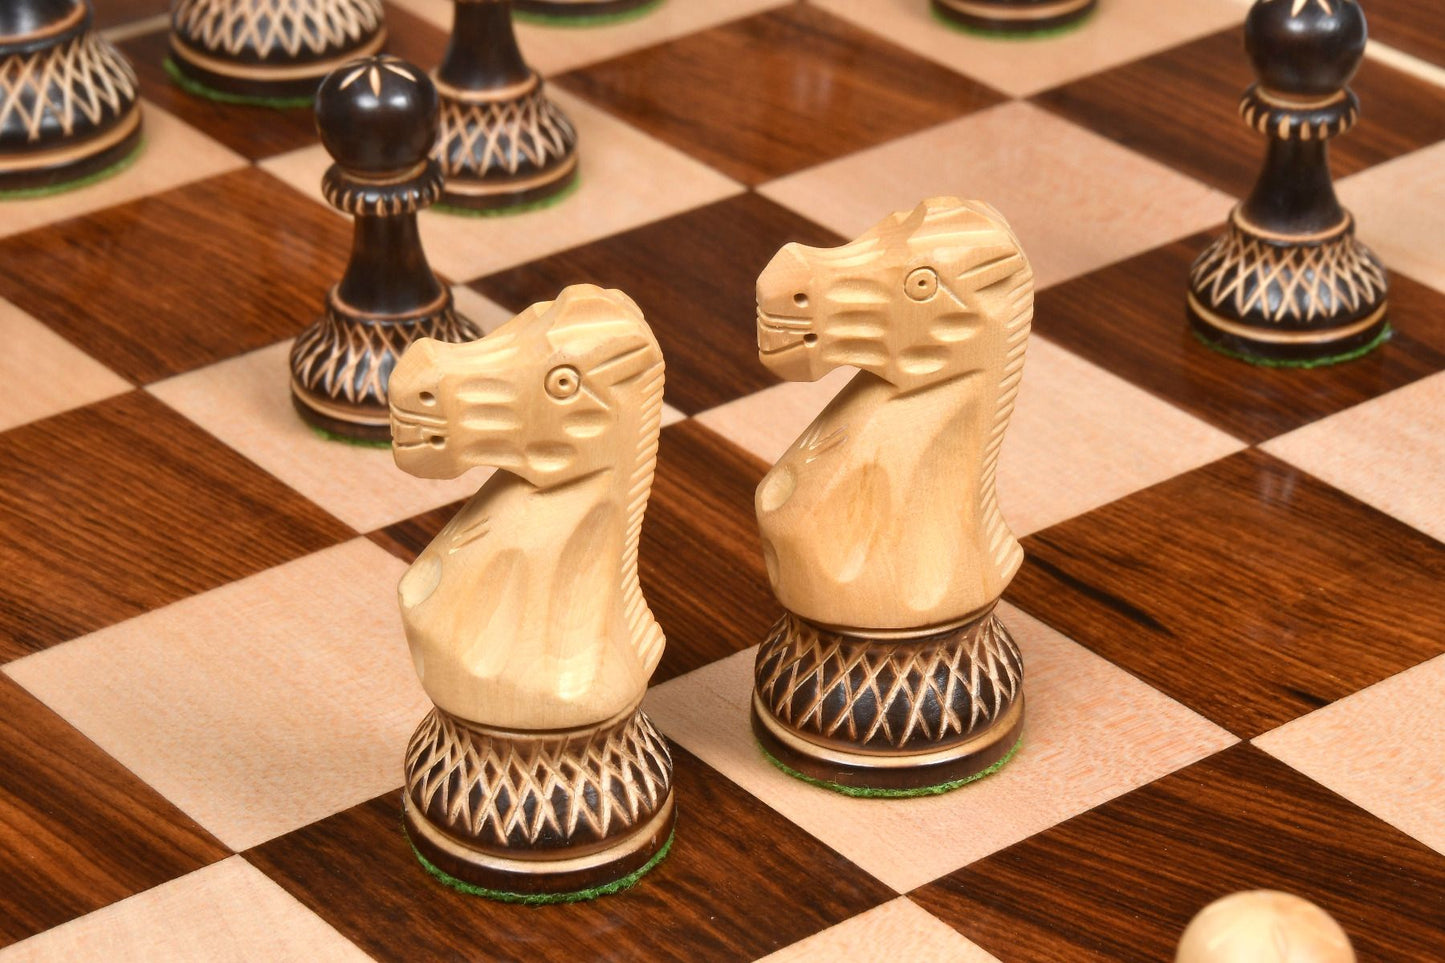 The Burnt Blazed Handcarved Pieces in Burnt Boxwood - 3.8" King with Board